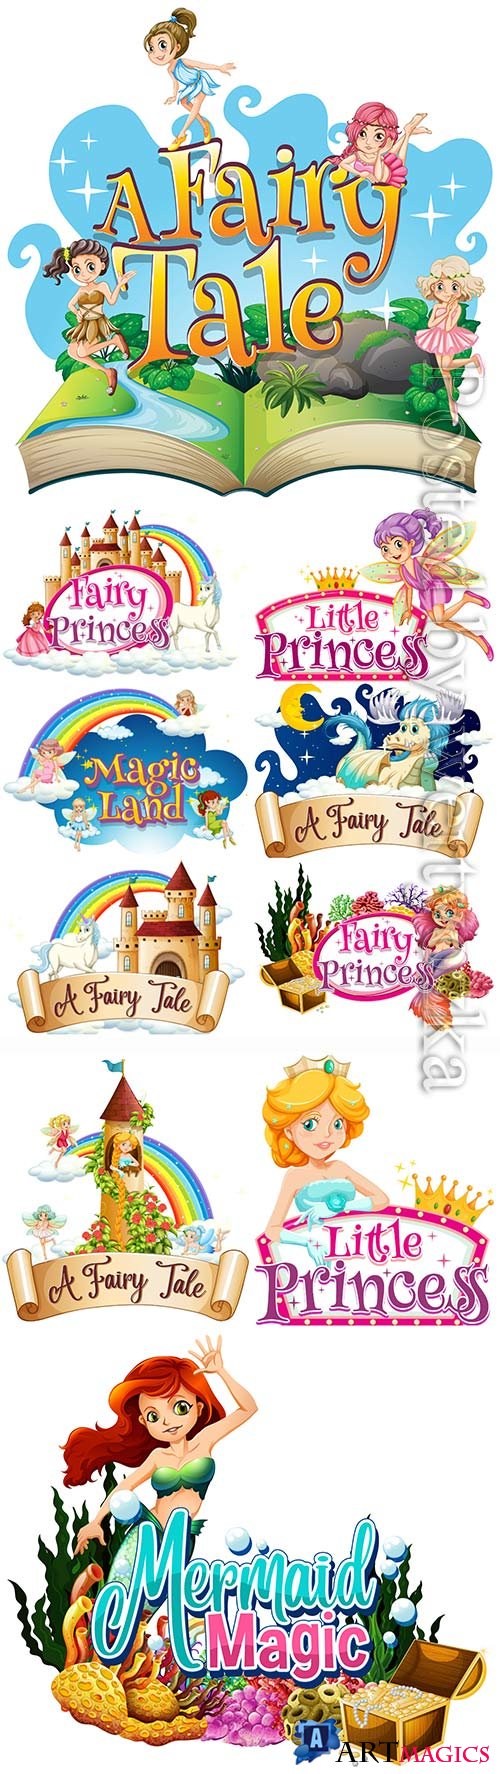 Fairy tale characters vector illustration